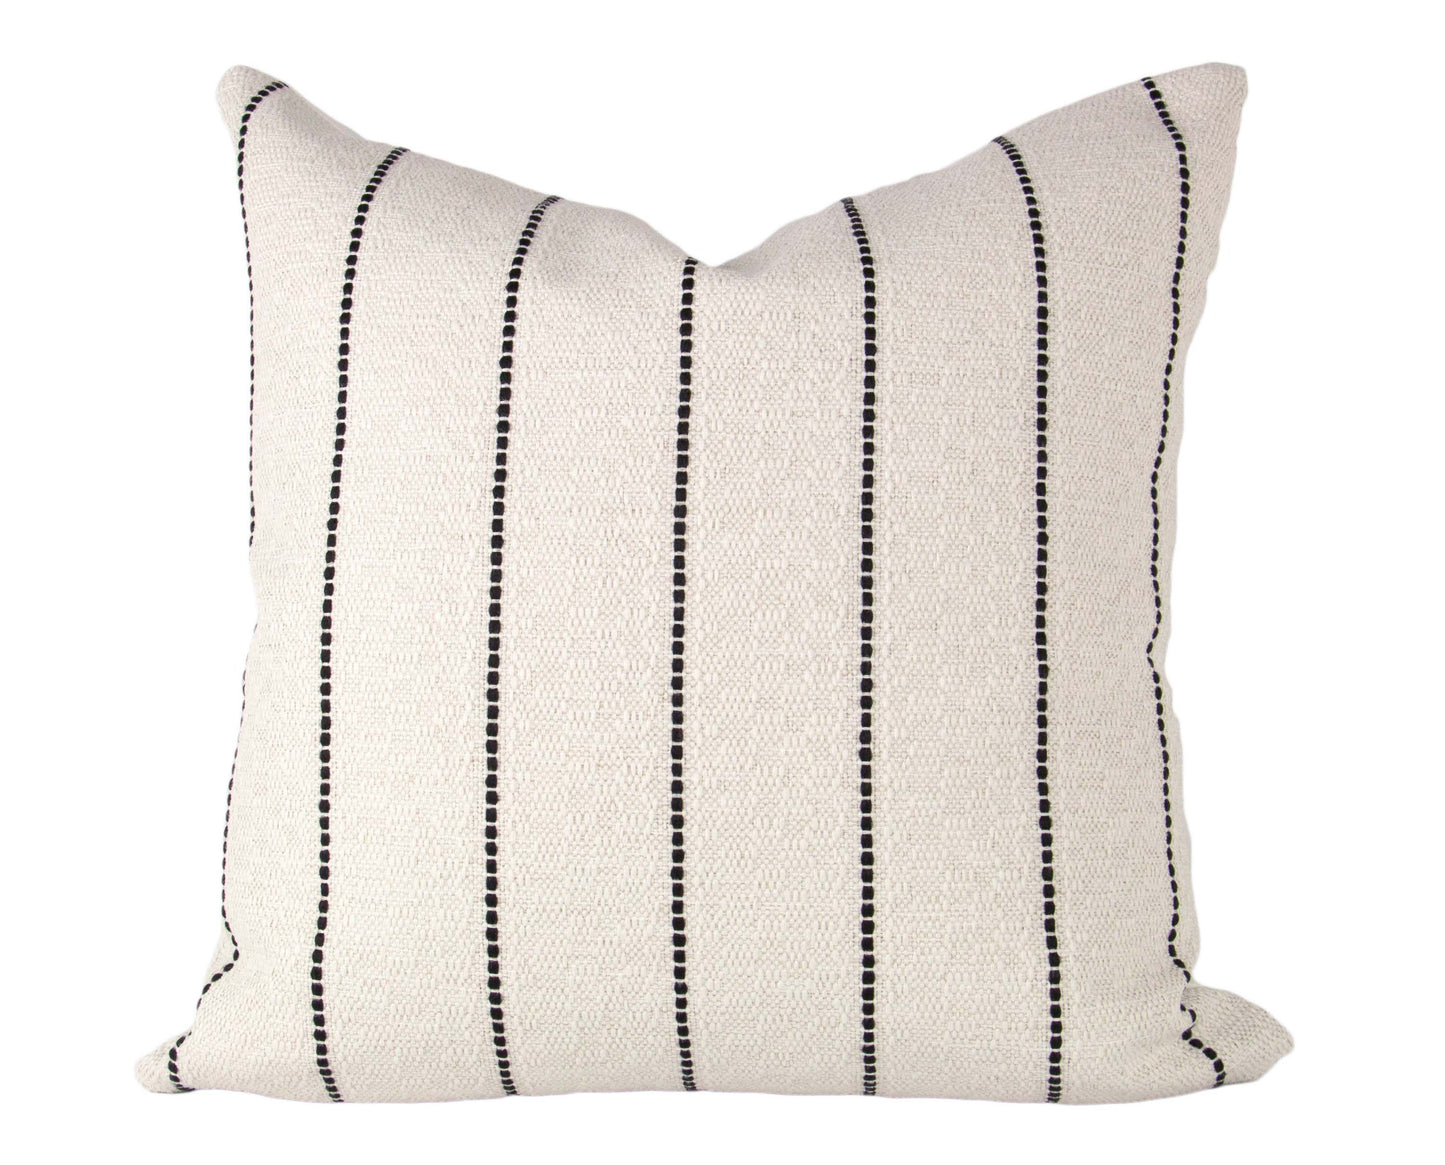 Cream & Black Striped Textured Pillow Cover